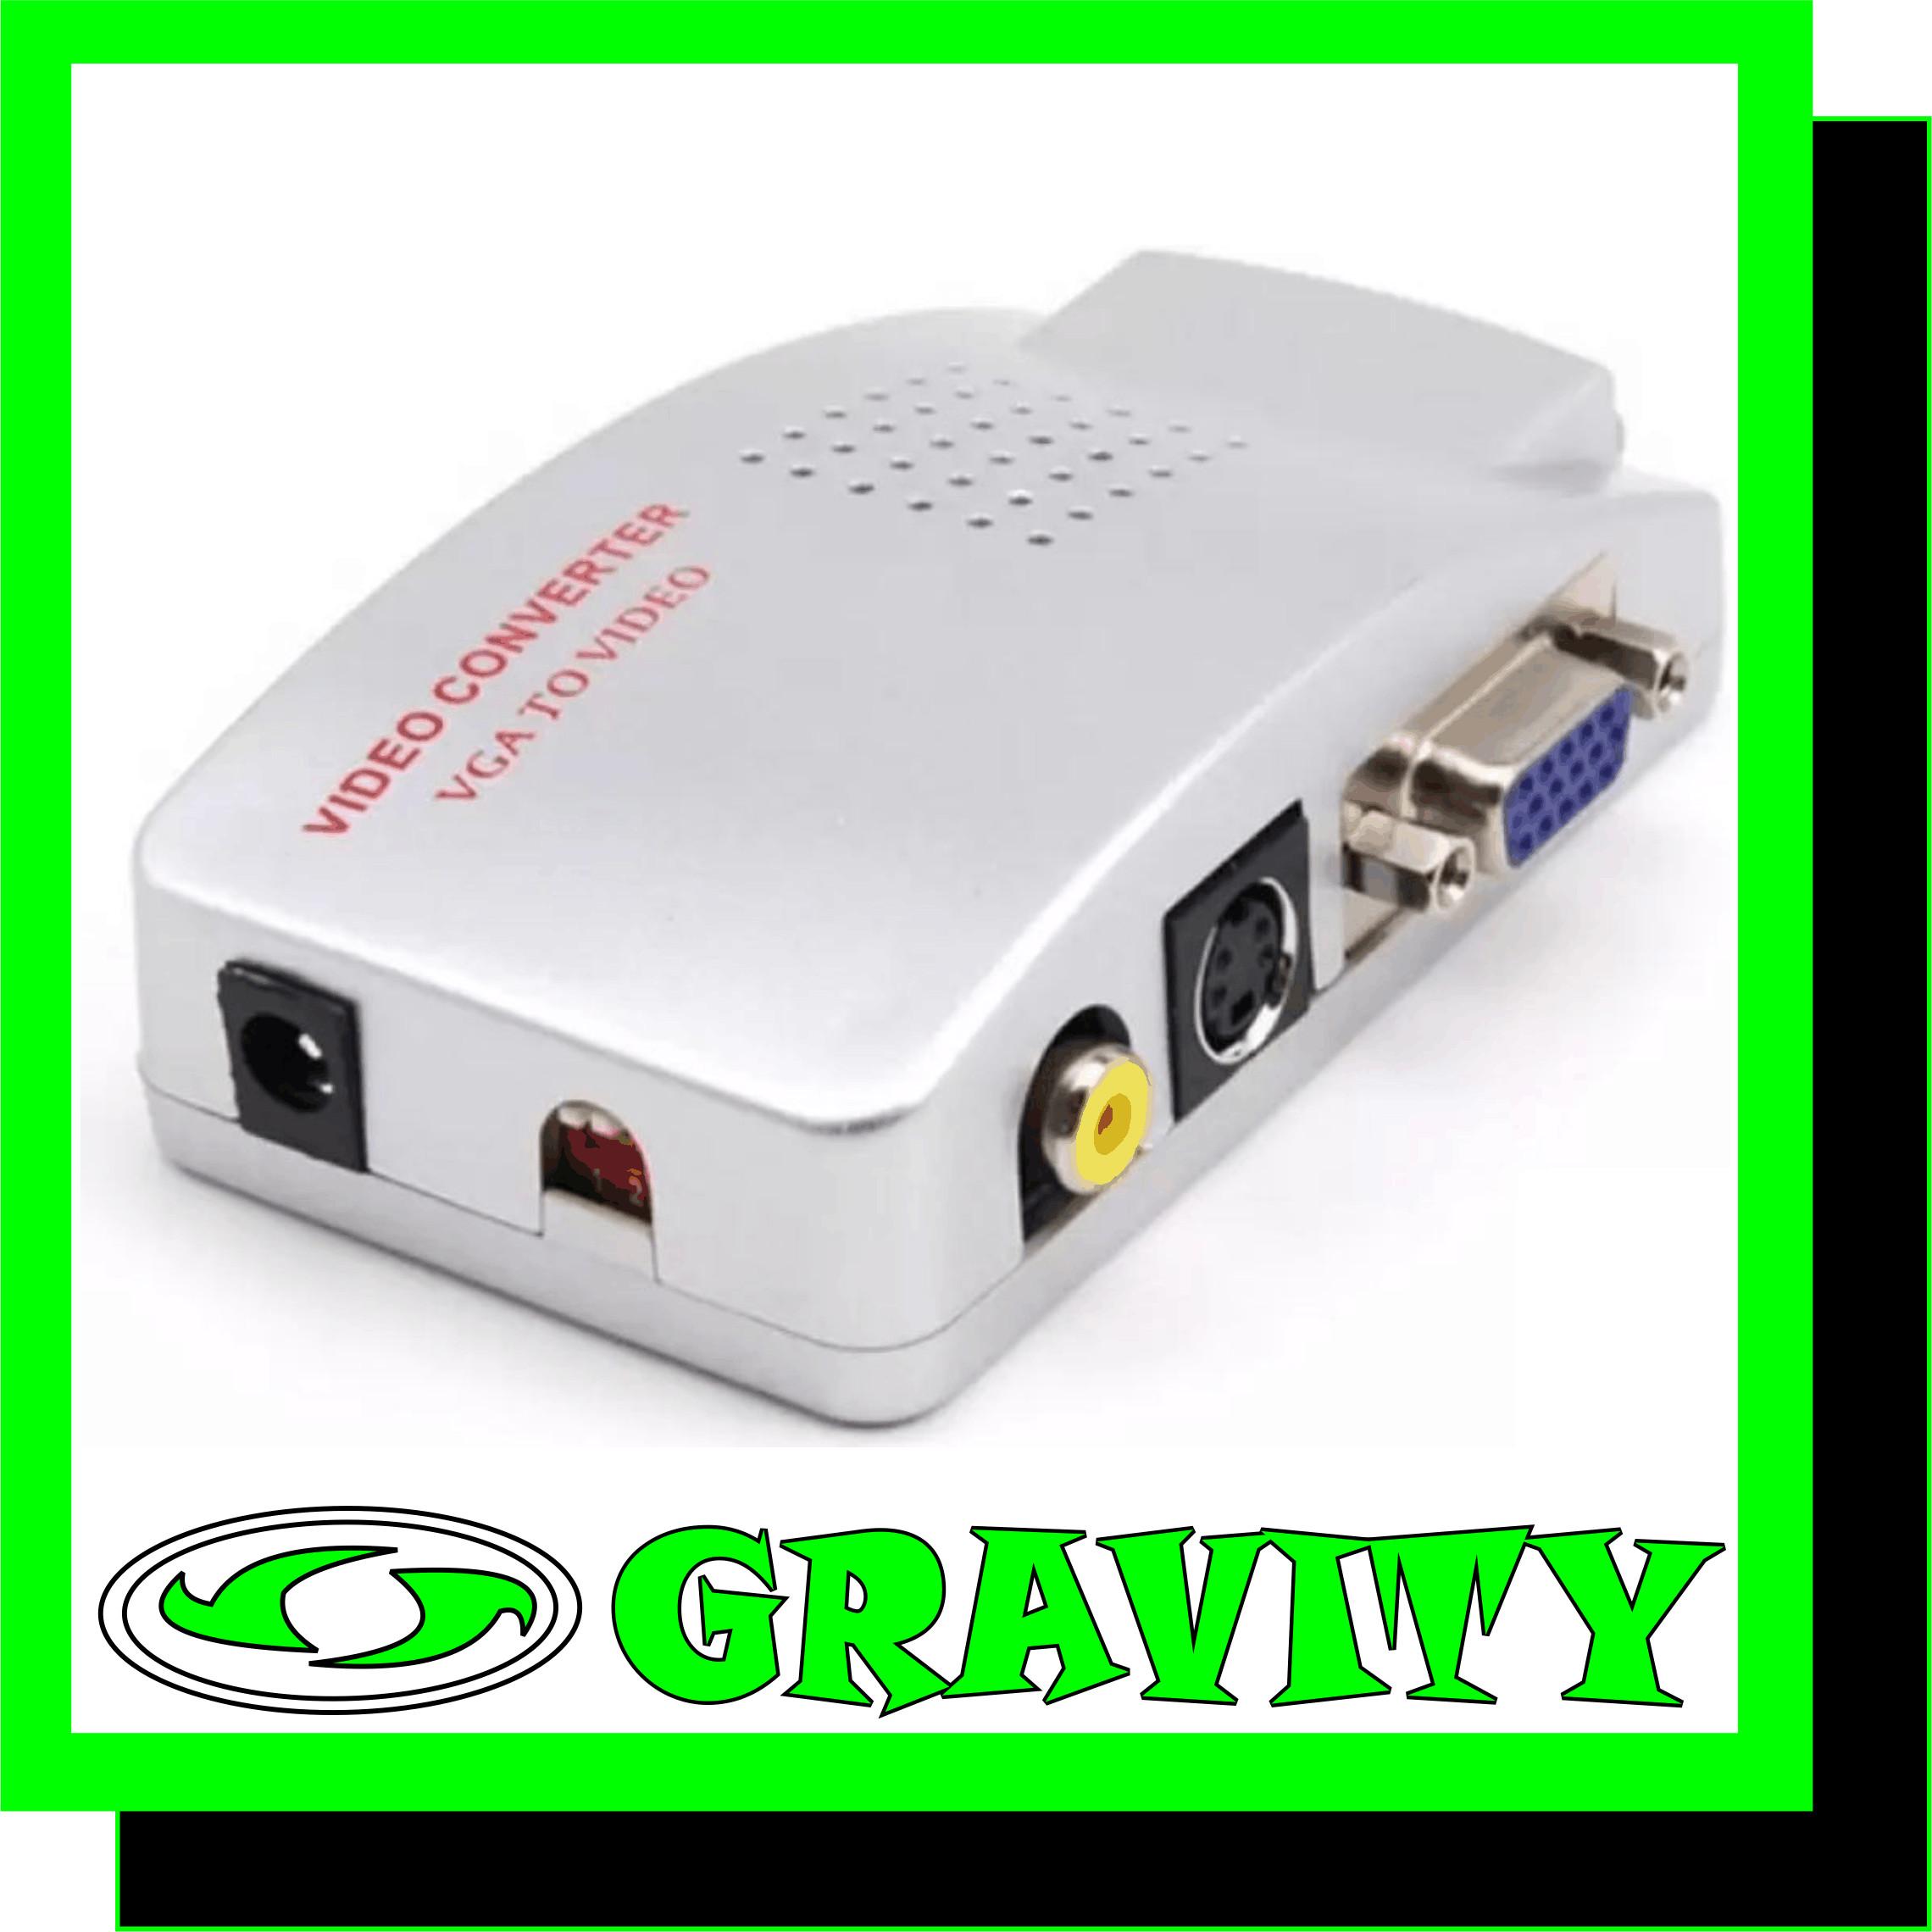 This converter is a higher-end solution to the age-old need of viewing your PC on your TV.  Convert your VGA signal to be viewed on any TV projector or any other viewing device that uses standard TV connectors with this simple external device.  Converts a VGA signal into PAL(Phase Alternating Line) S-Video, VGA bypass or Composite RCA signal.  Use TV as PC monitor to view presentations, games, pictures and movies or browse the Web.  This PC to TV converter also features a VGA output port that allows for VGA Loop-Through.  Pure hardware design, simple and quick to install. Just Plug & Play.  No software or driver requirement, compatible with any operation.  Enables notebook computer users to easily connect and use a large-format monitor.  Adjust and set preferences with onscreen display and front-mount control panel.  IN THE BOX : VGA to Video Converter box, S-Video Cable, VGA Cable, Video Cable,USB power cable 